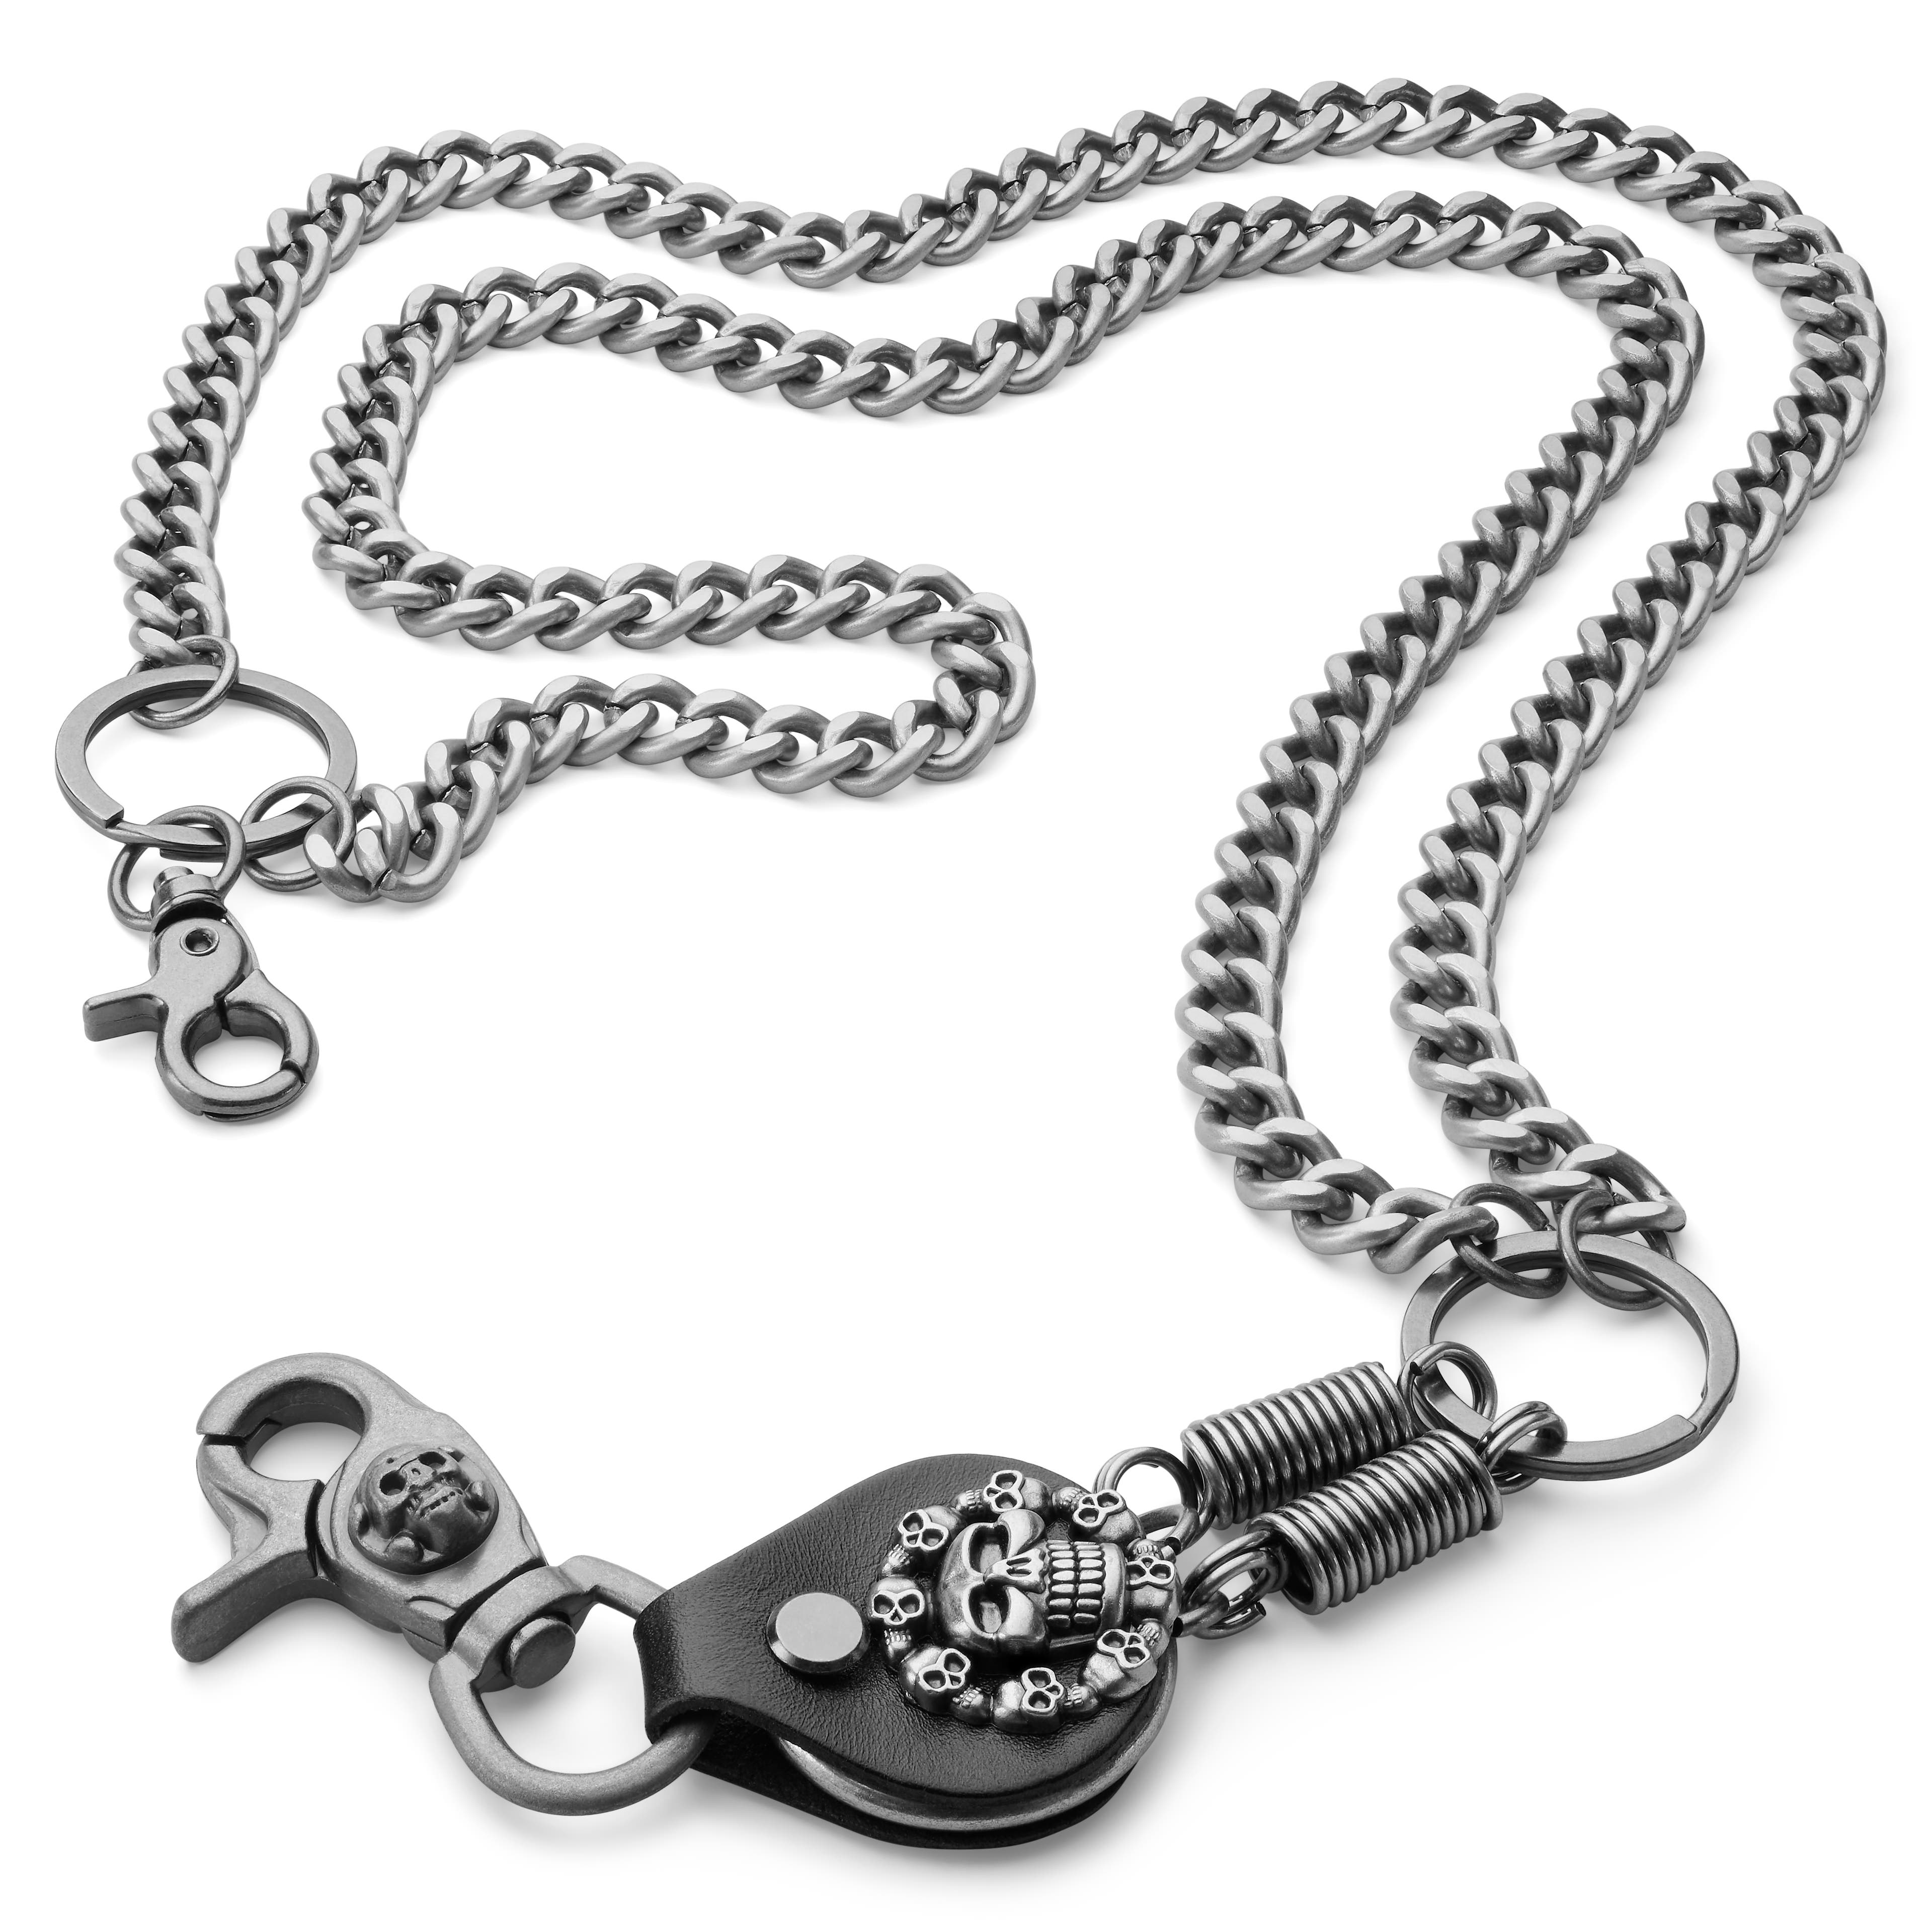 Regular Ball and Chain for Wallet 12